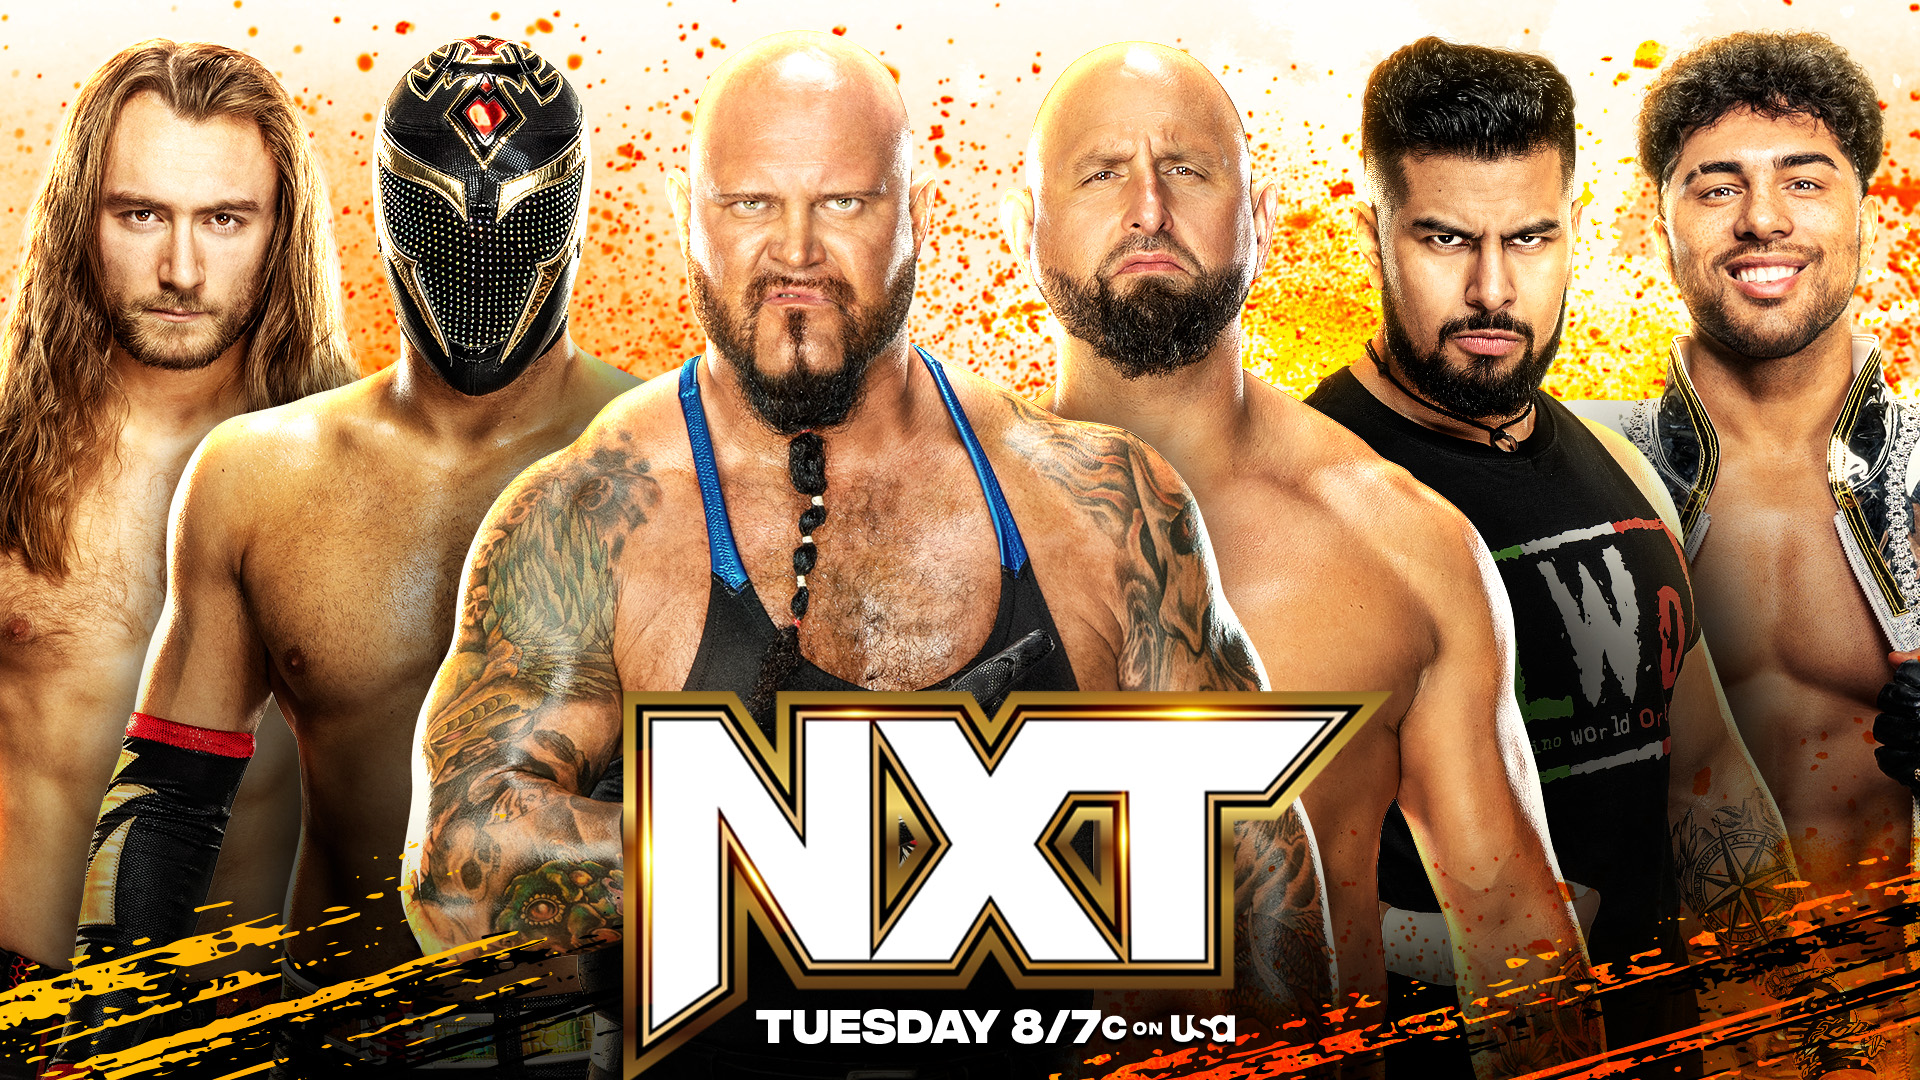 A match graphic for WWE NXT.